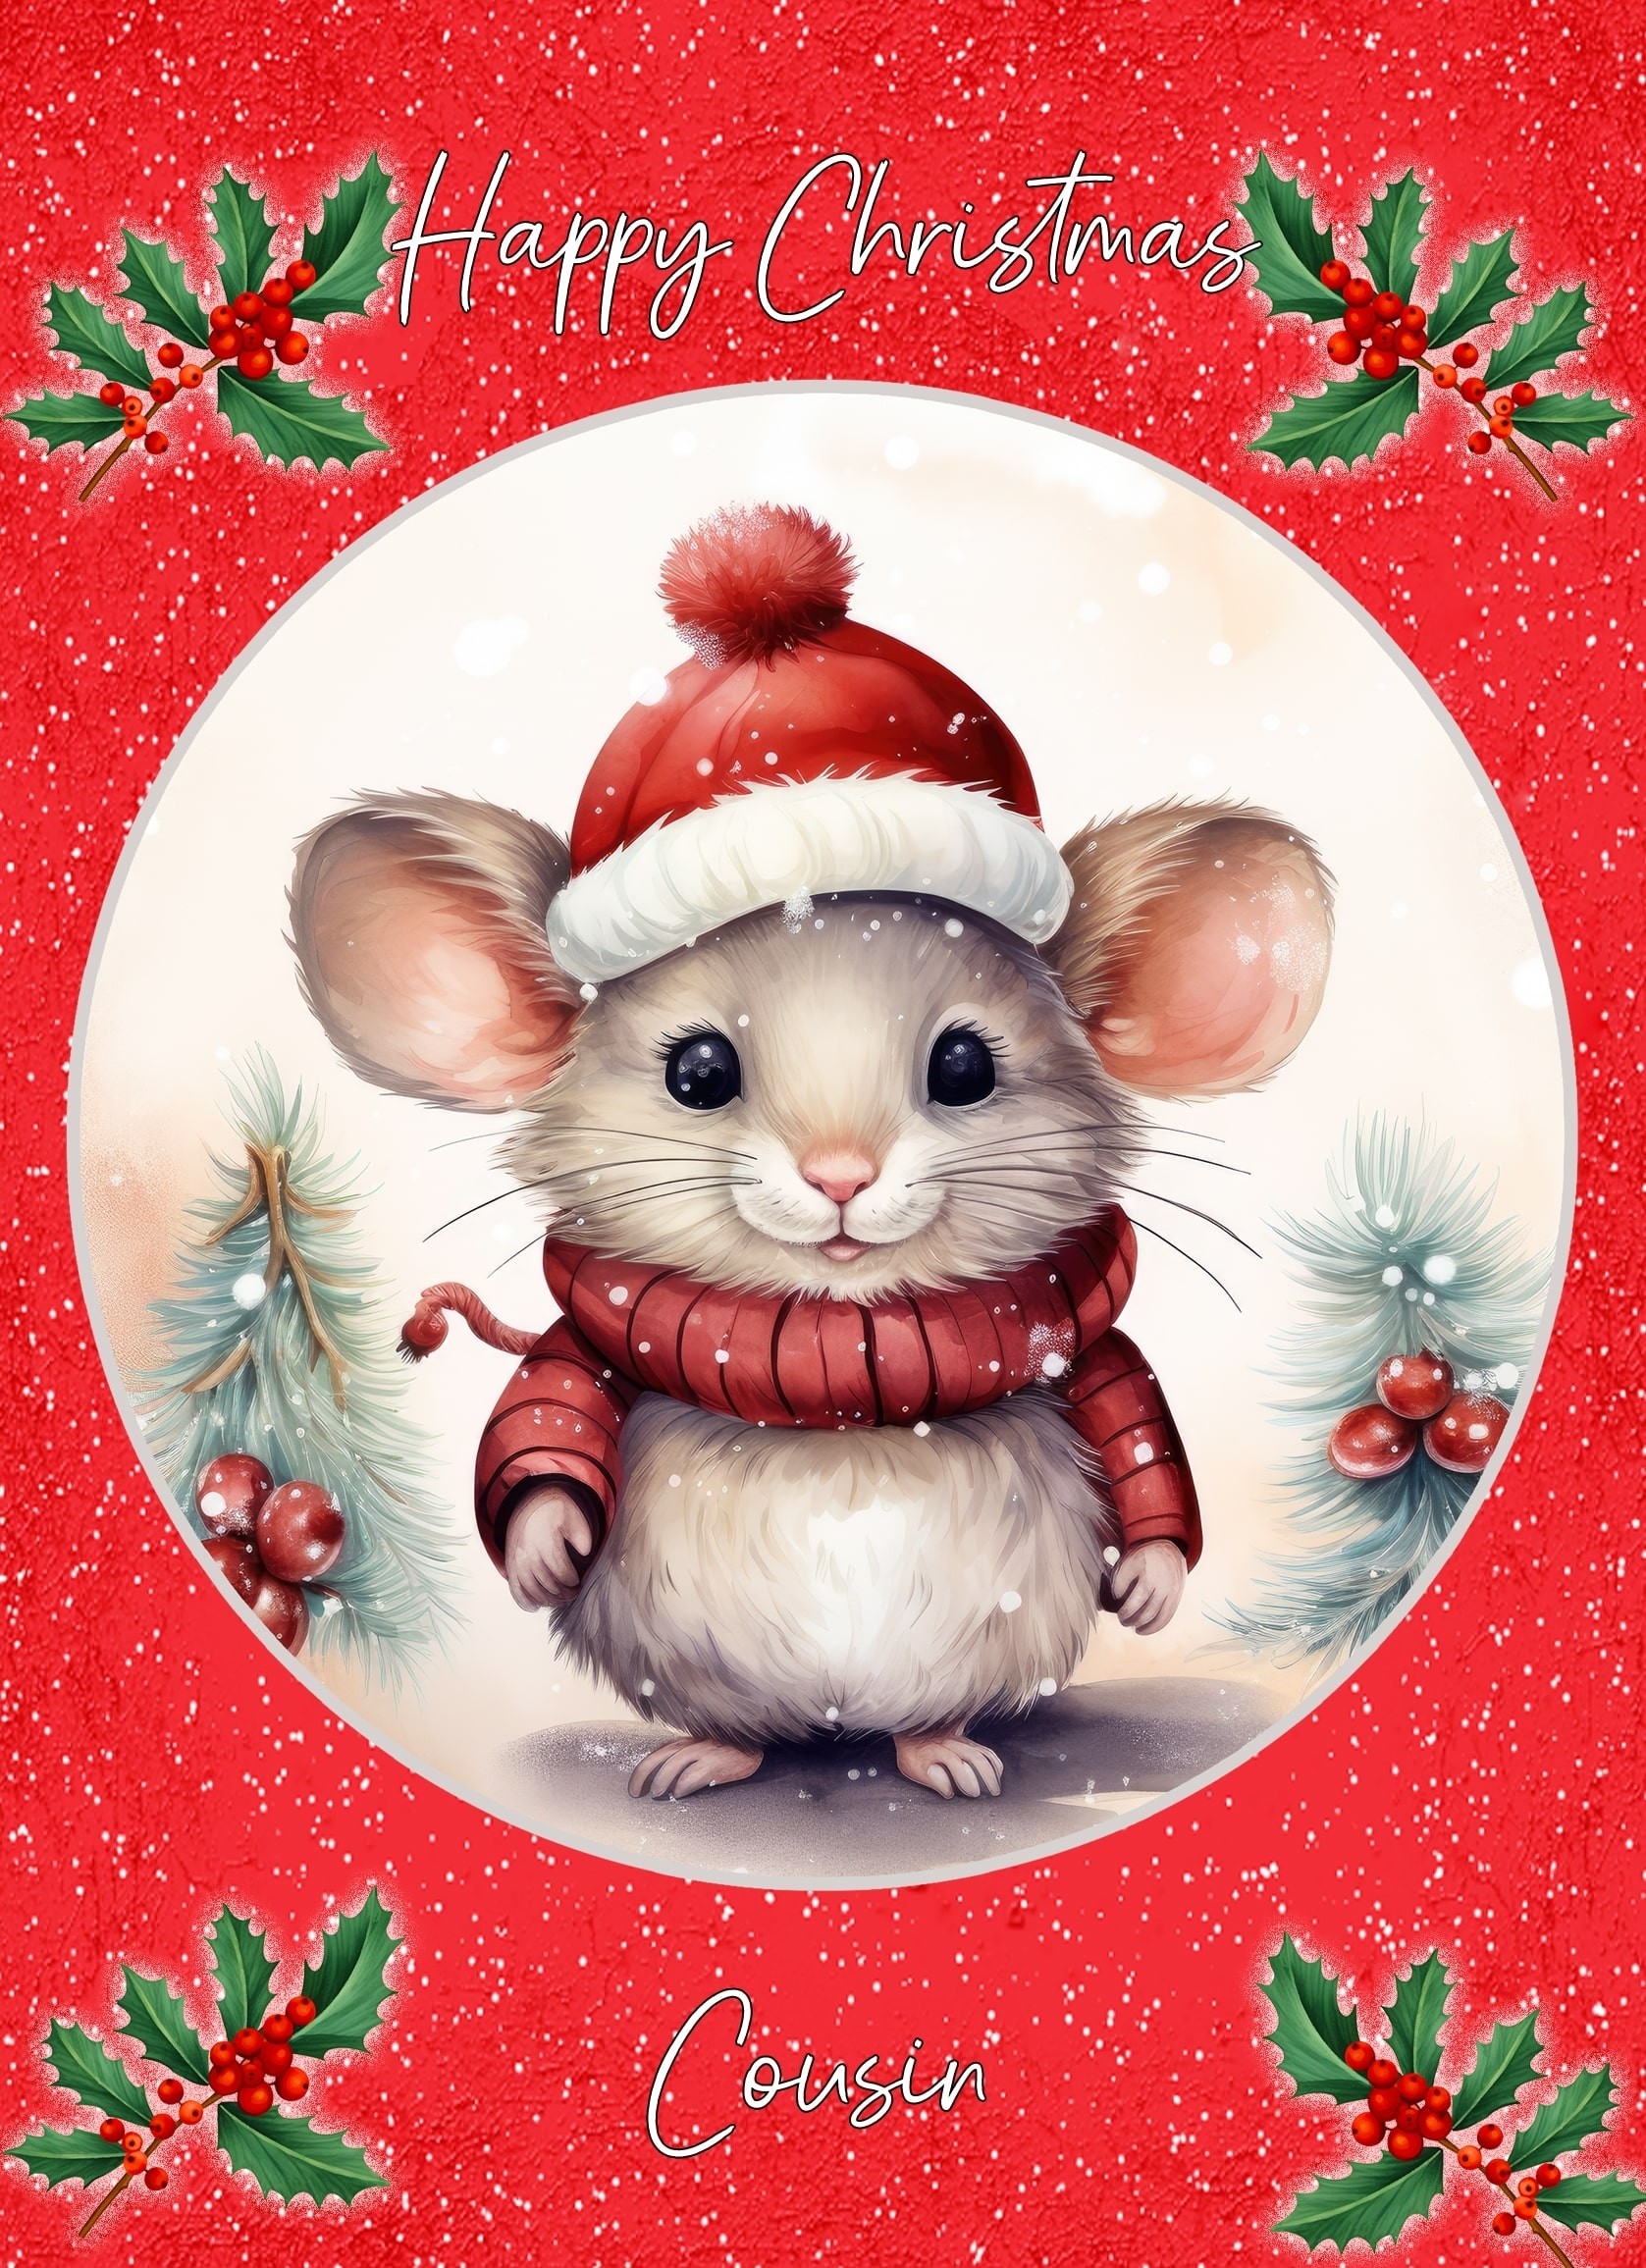 Christmas Card For Cousin (Globe, Mouse)